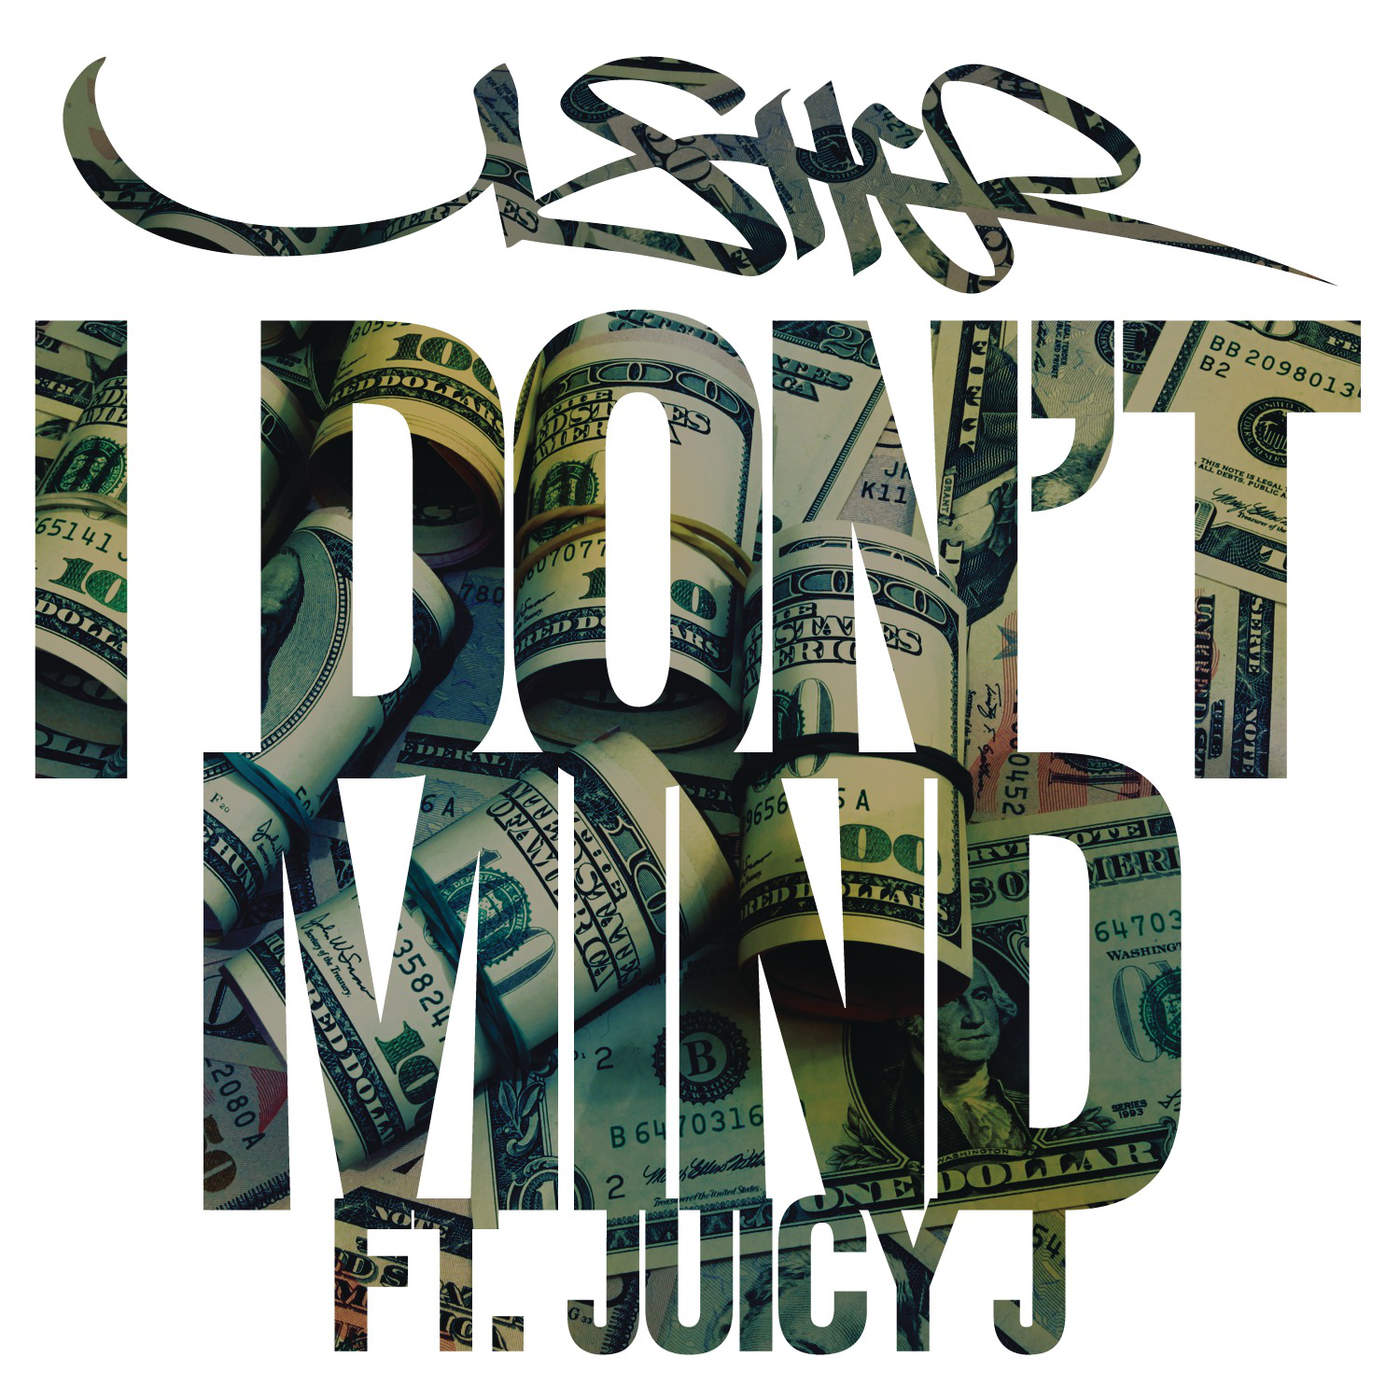 Art for I Don't Mind (feat. Juicy J) by Usher